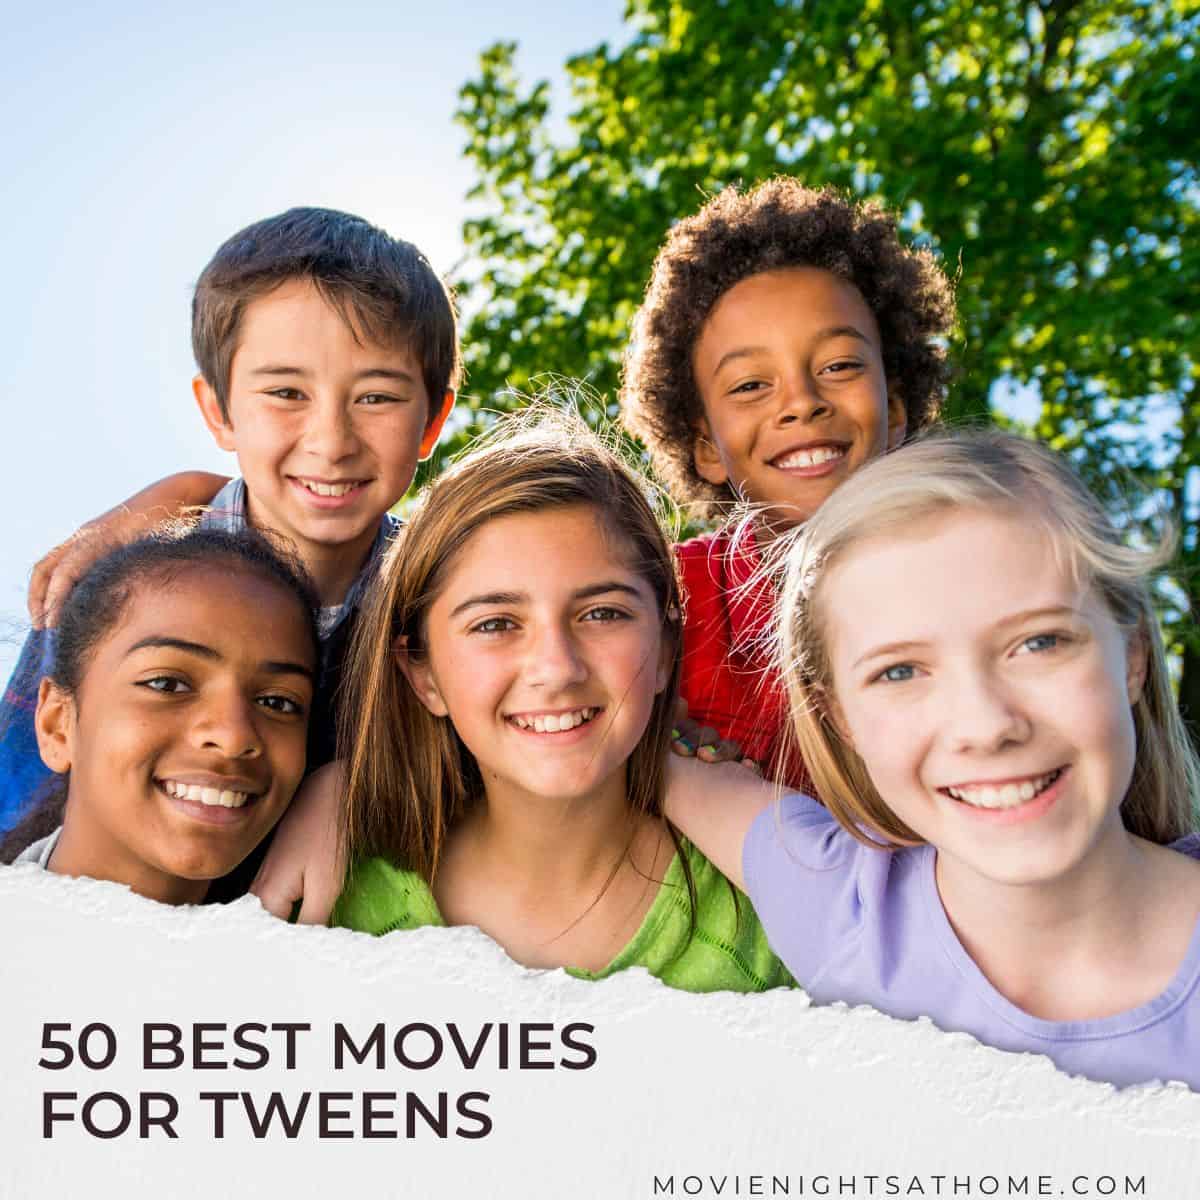 50 Best Movies for Tweens - Girls and Boys 11-13 Year Olds